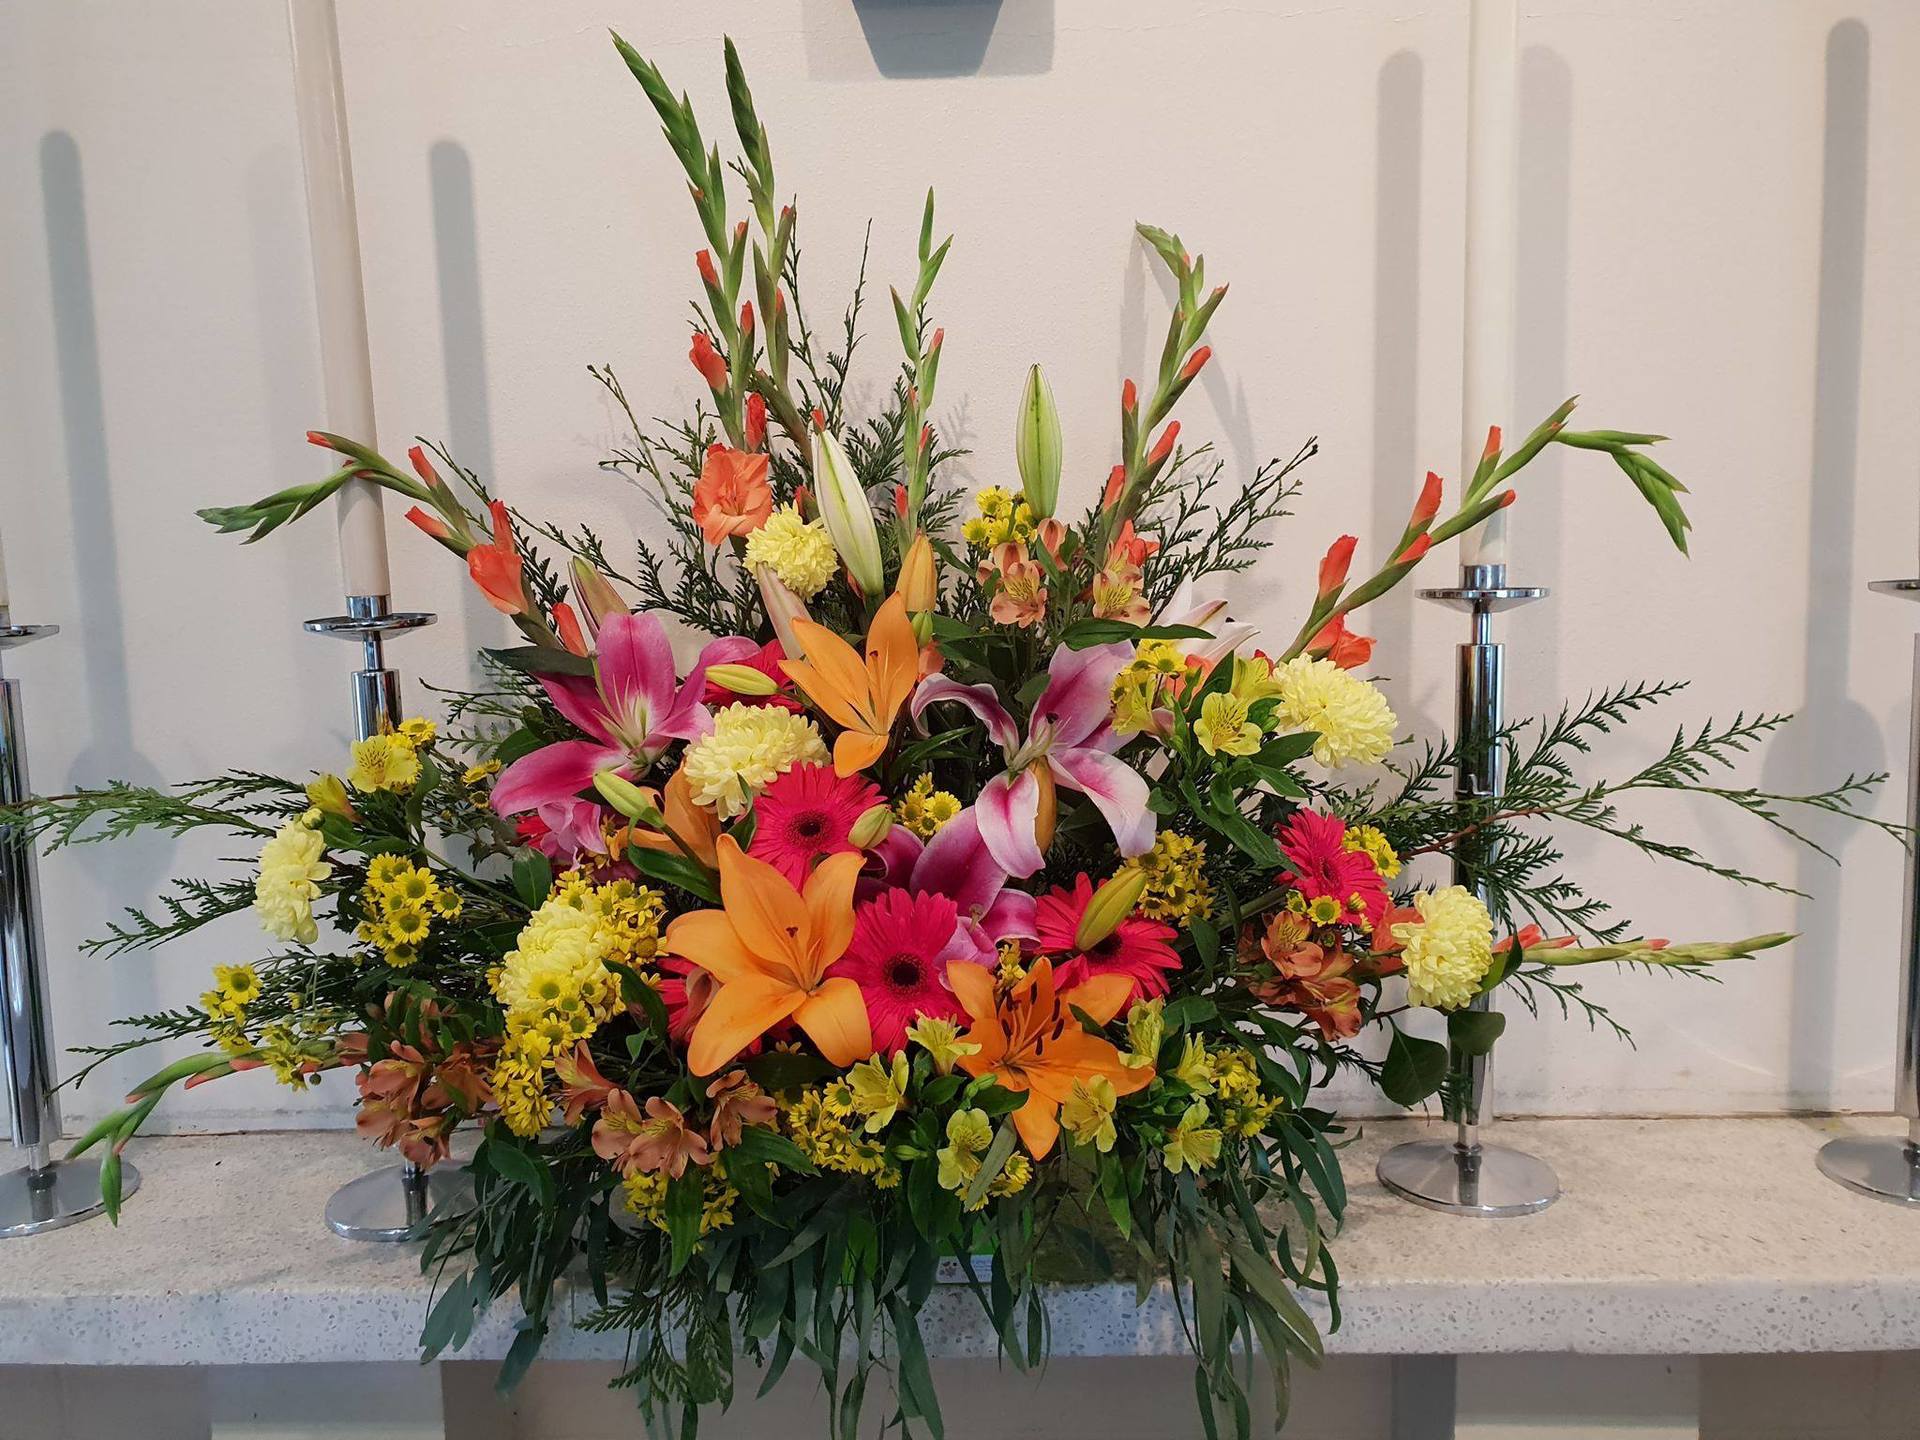 Busy Suburban Florist for SaleBusiness For Sale